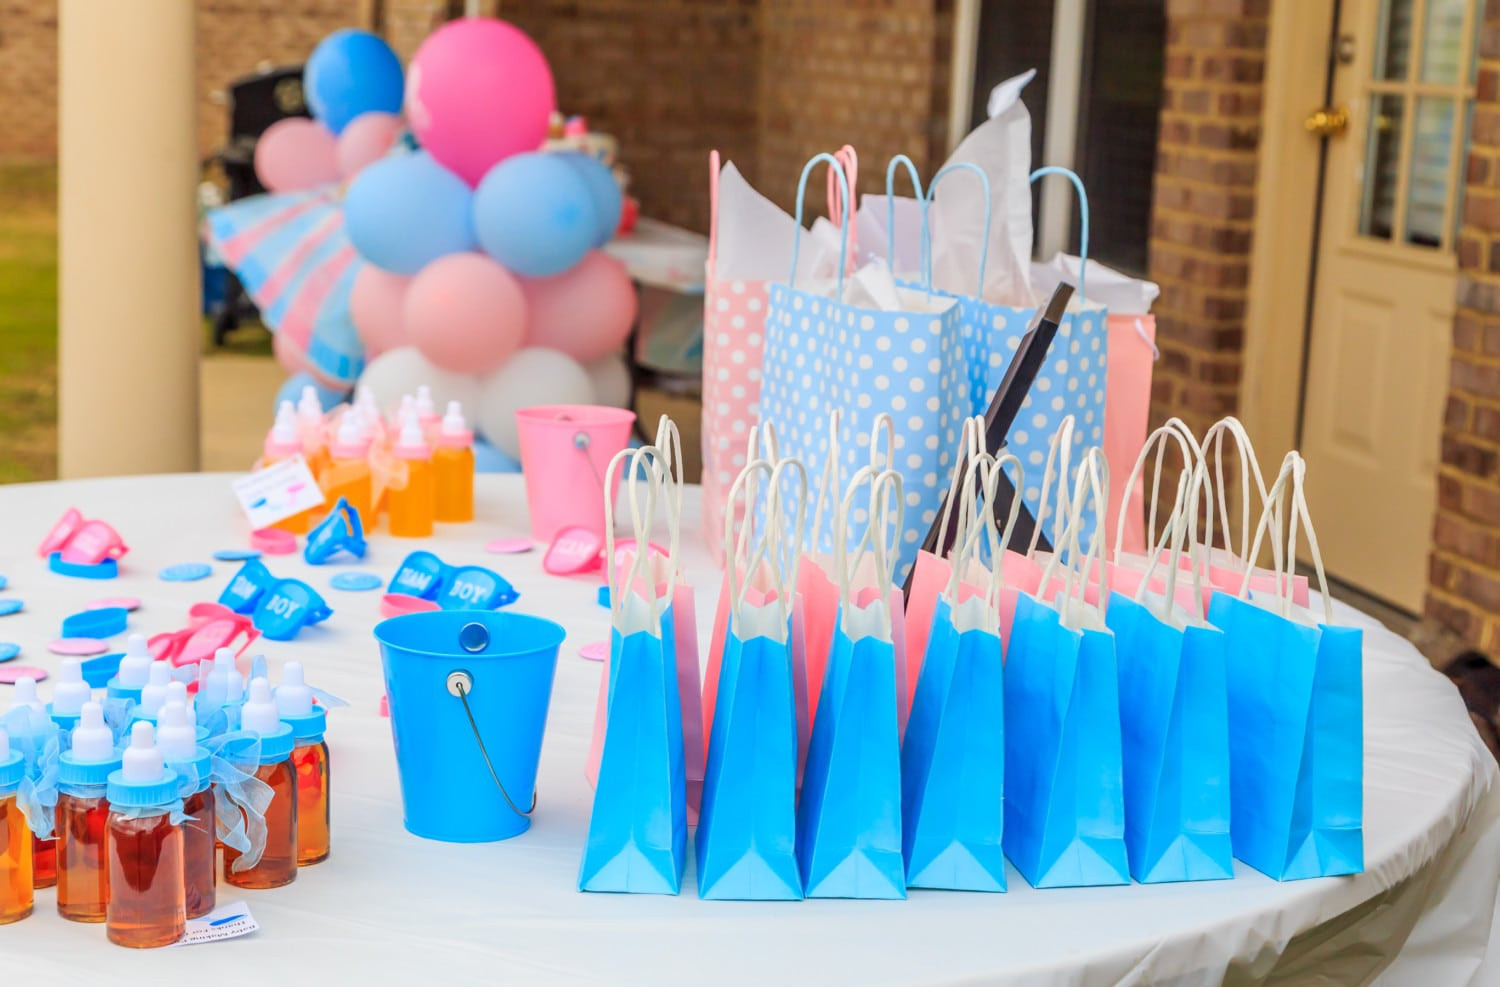 Decoration Ideas For Gender Reveal Party
 Over The Top Gender Reveal Parties Simplemost